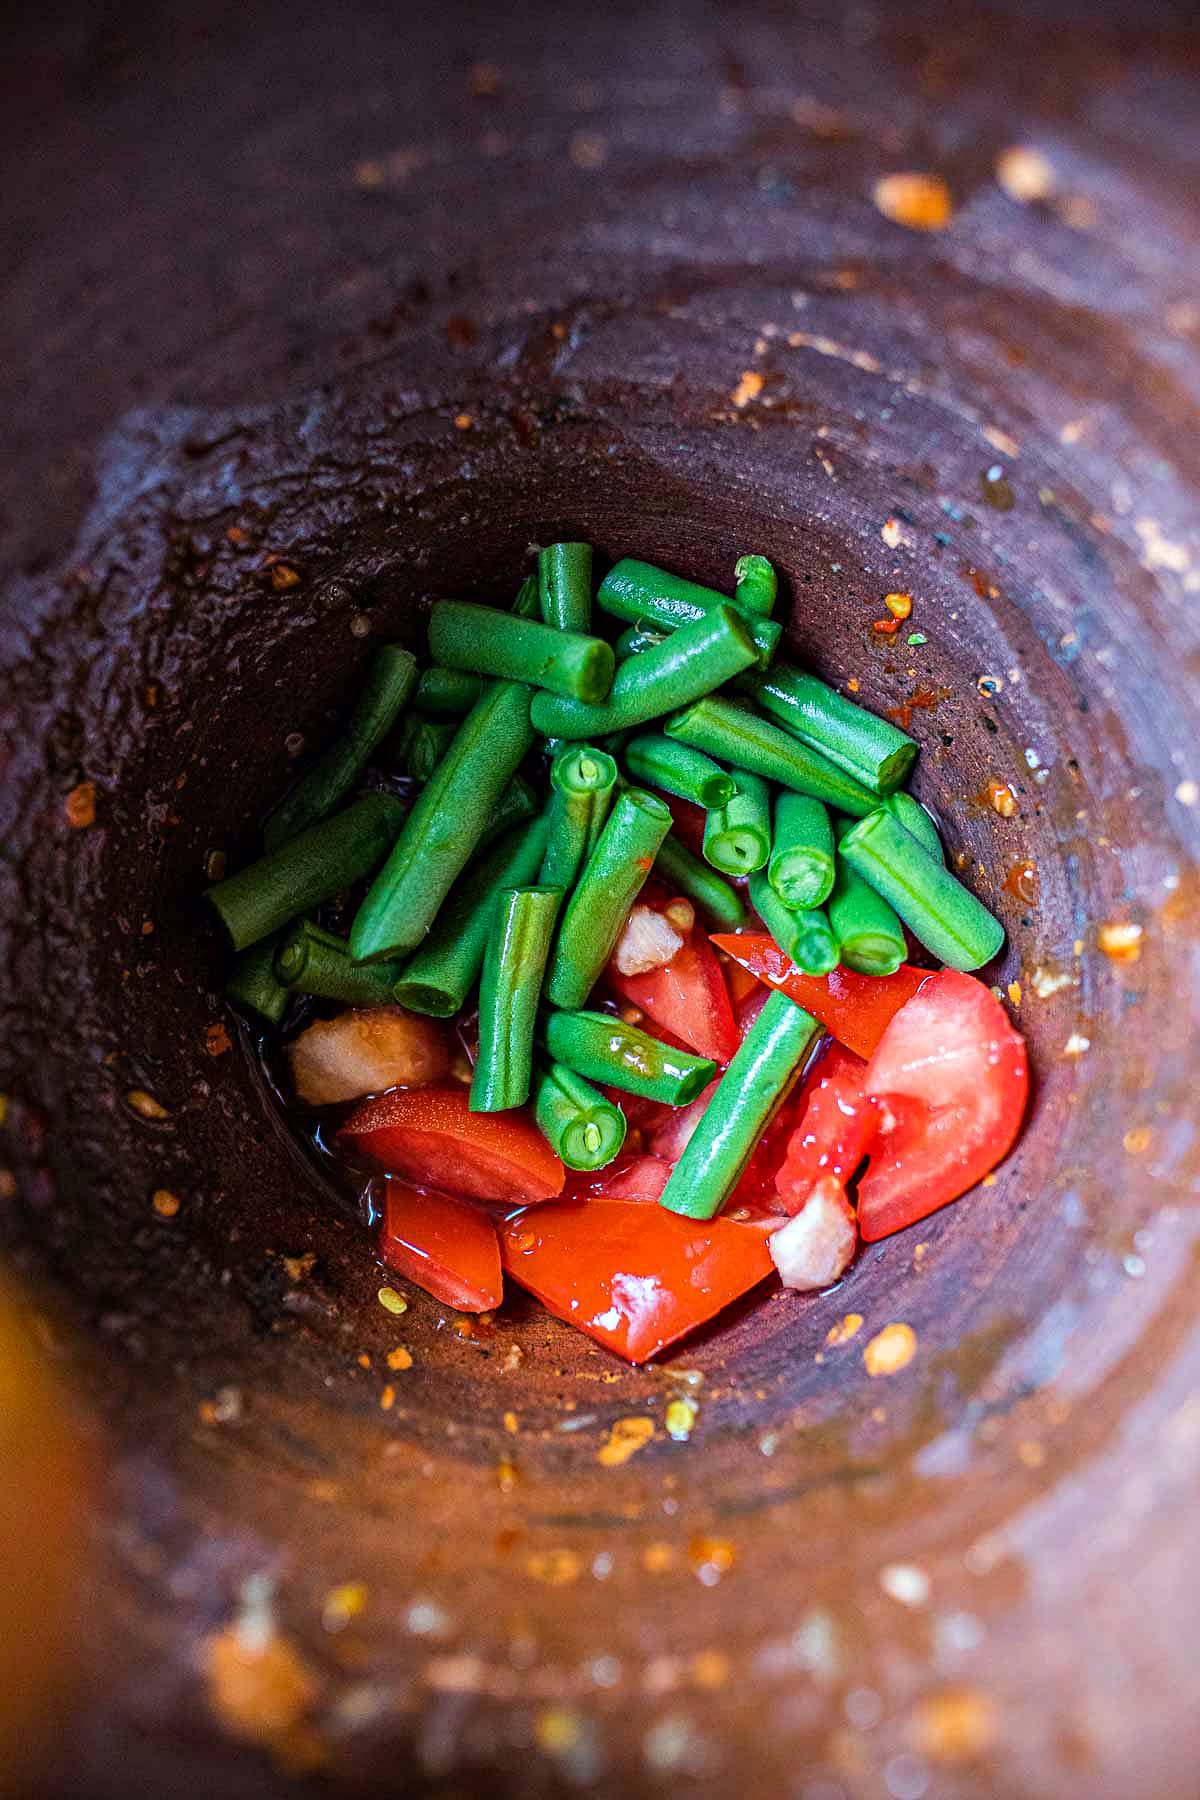 beans and tomatoes in mortar